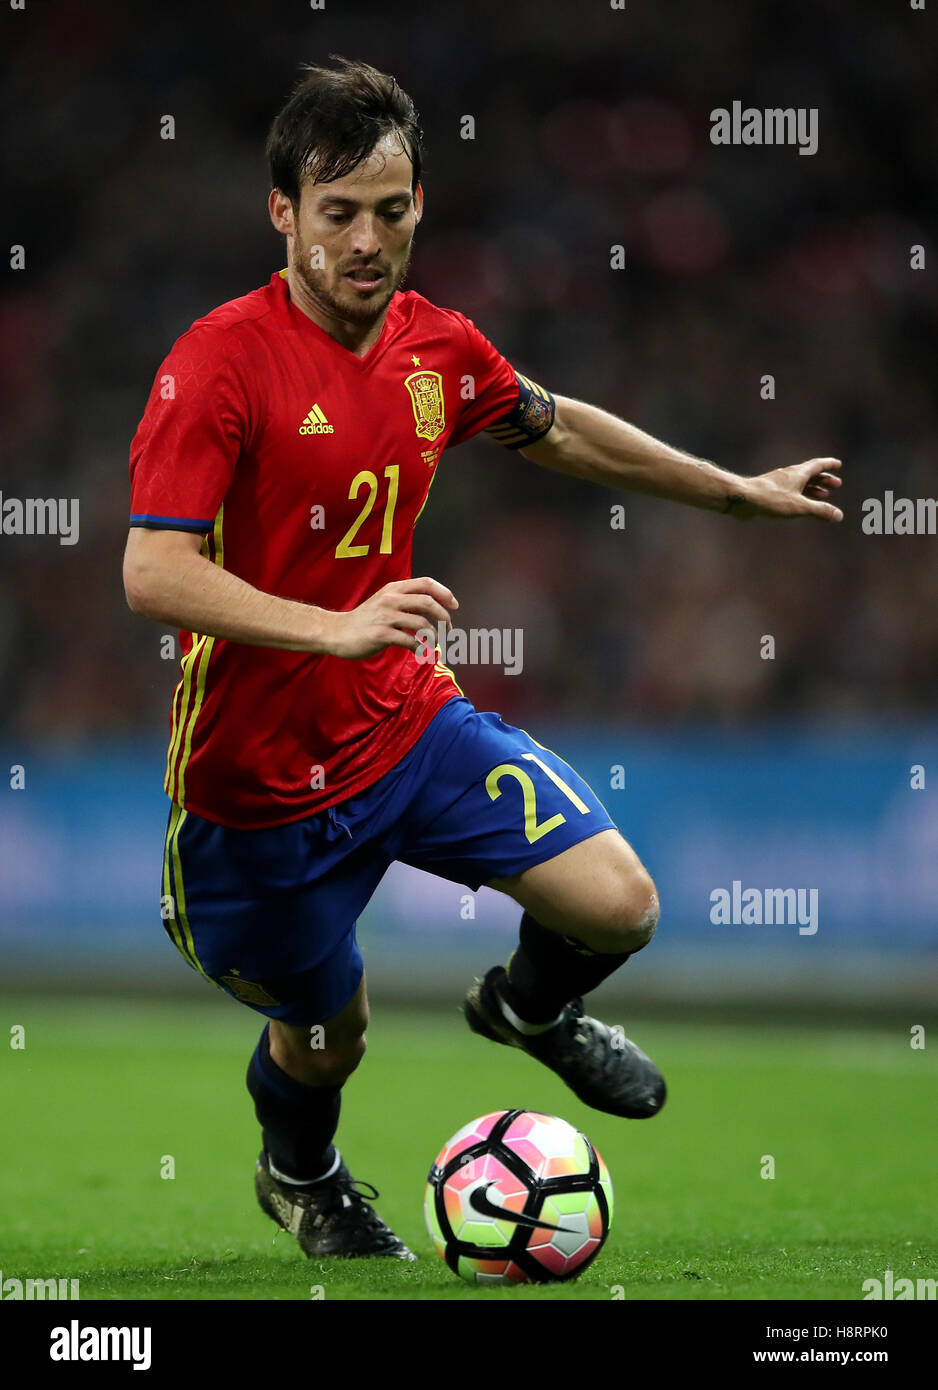 Spain's David Silva during the International Friendly at Wembley Stadium, London. PRESS ASSOCIATION Photo. Picture date: Tuesday November 15, 2016. See PA story SOCCER England. Photo credit should read: Nick Potts/PA Wire. Stock Photo